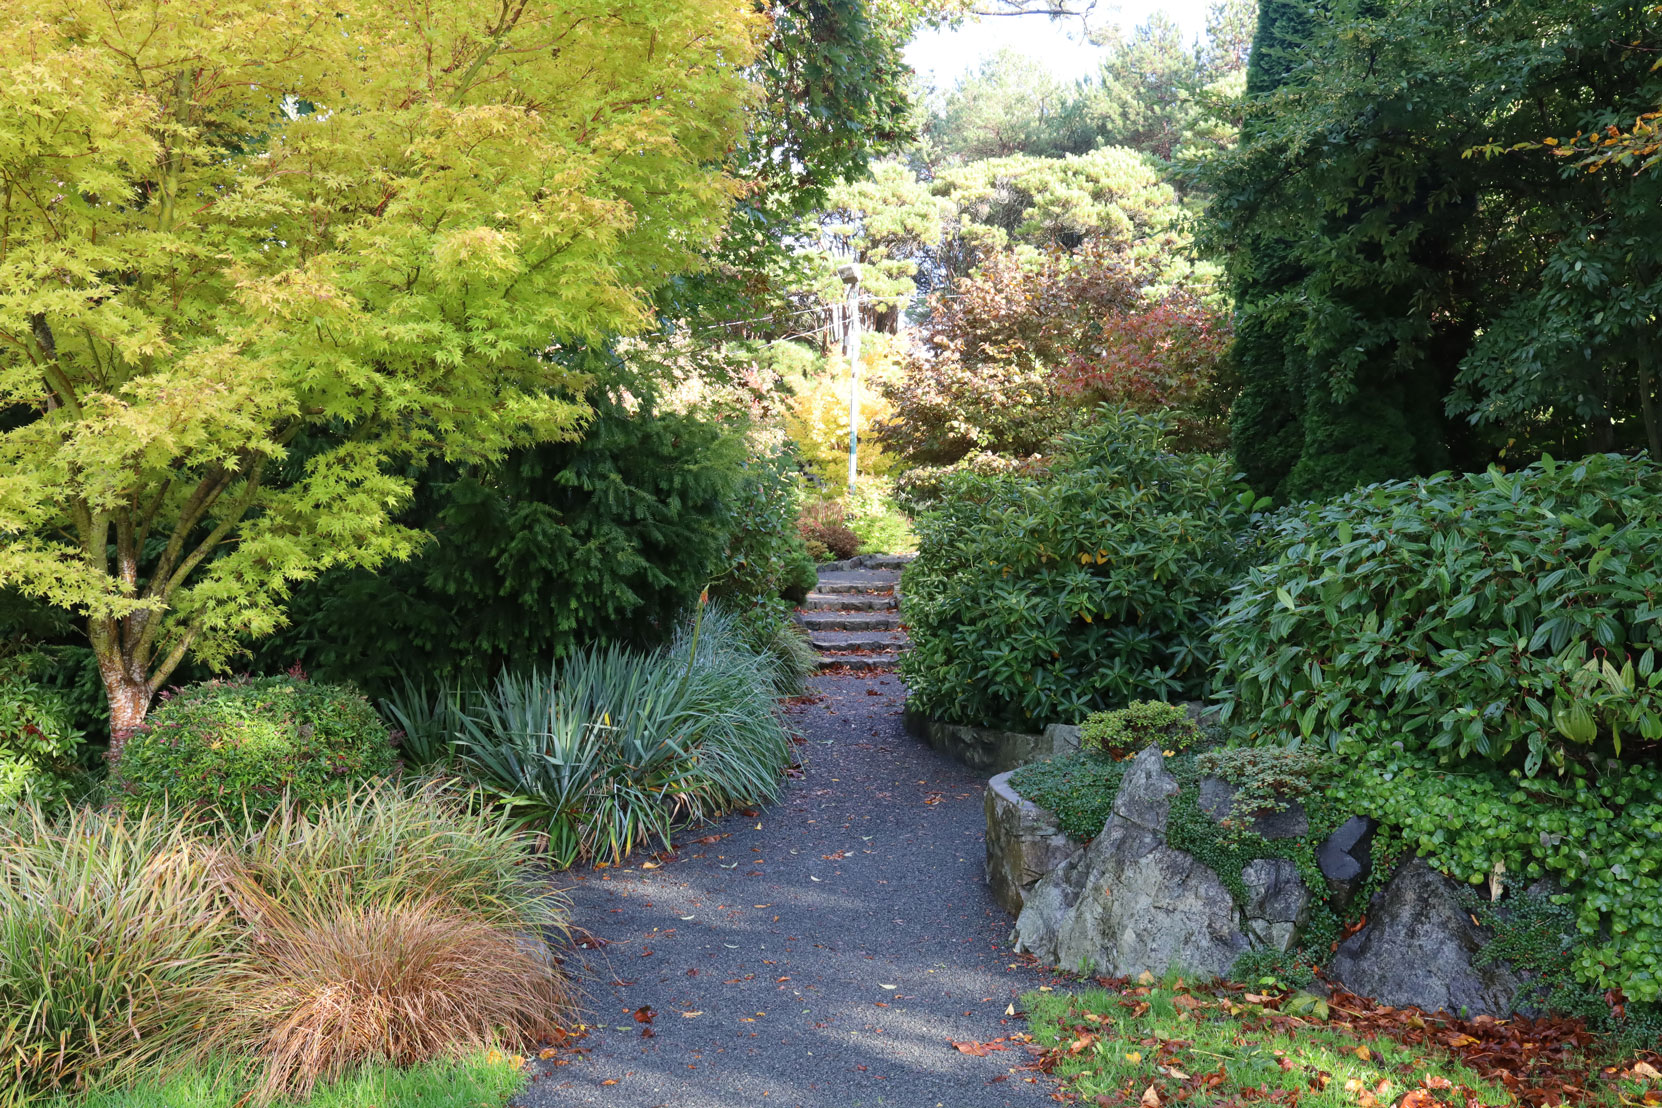 The site of Isaburo Kishida's Japanese Tea Garden design in Gorge Park, as it appears today. (photo by Author)